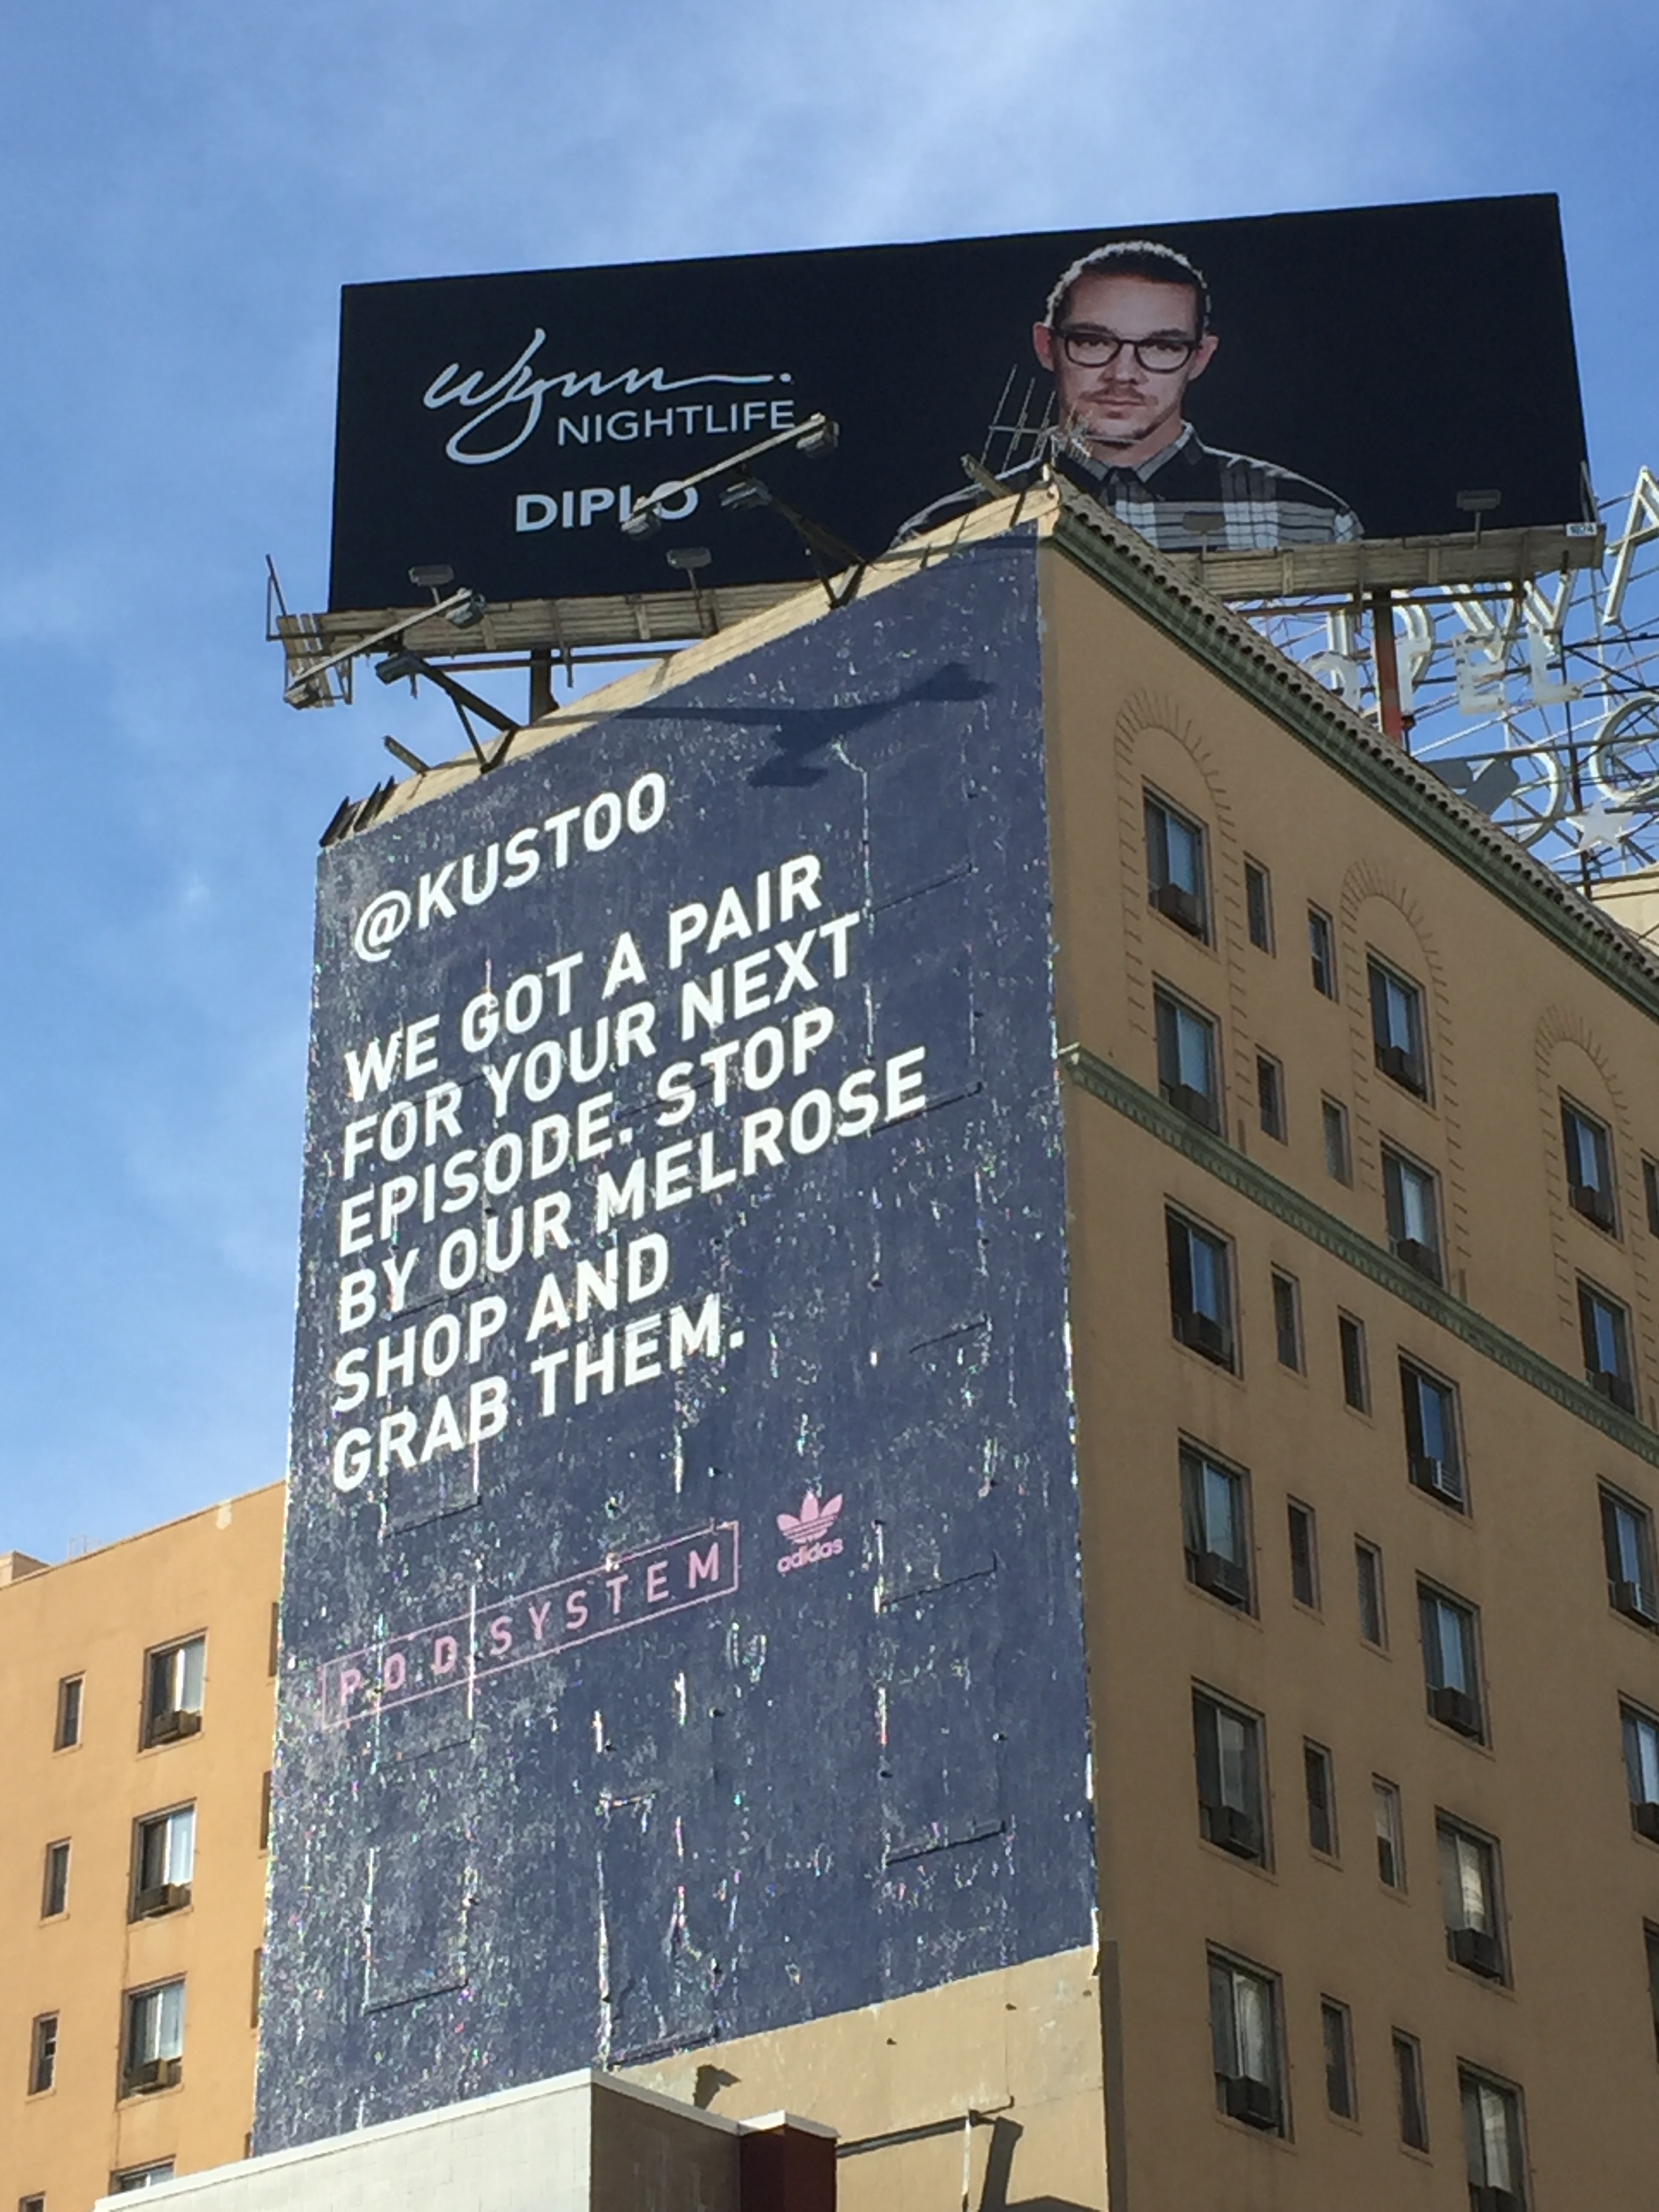 Embrace your story on your own billboard